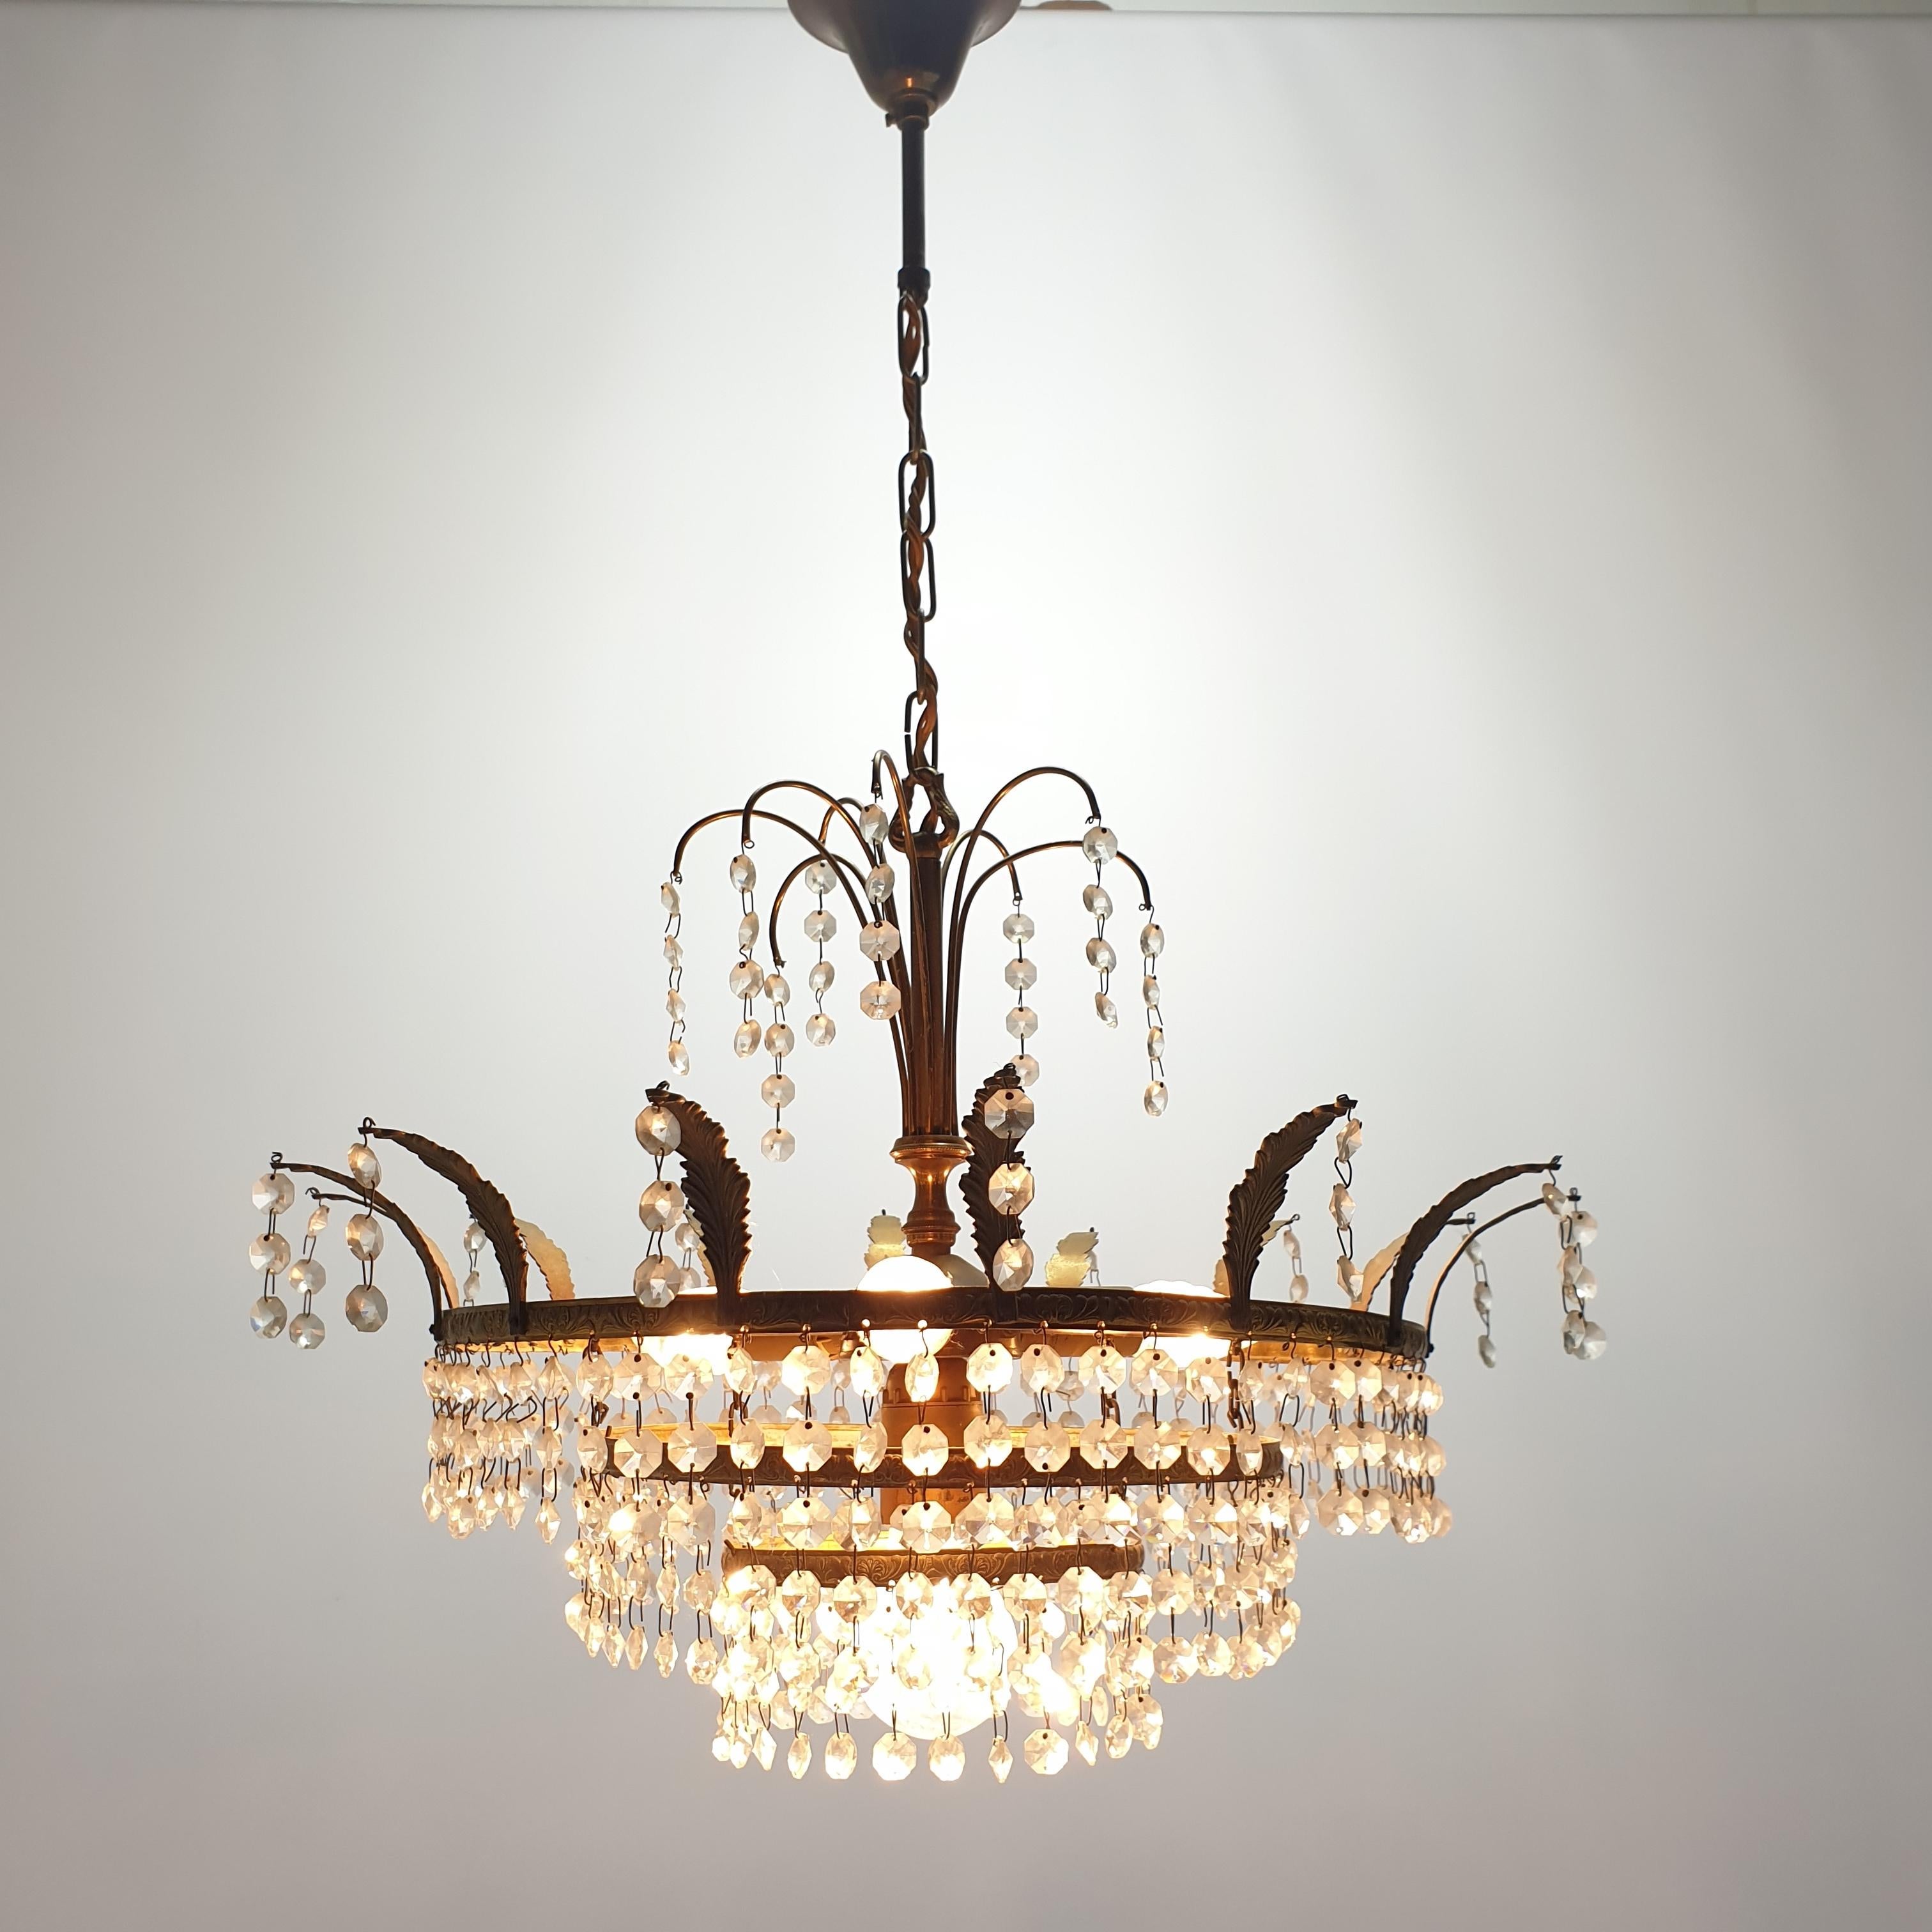 Hand-Crafted French Empire Style Crystal Glass and Brass Chandelier, 1920's For Sale